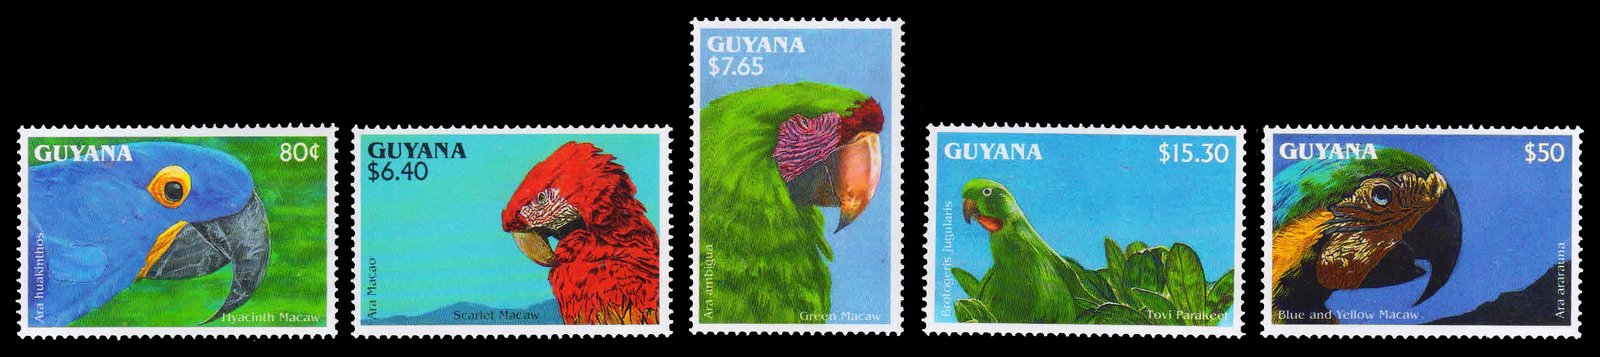 GUYANA 1993 - South American Parrot. Birds. Set of 5 Stamps, MNH. S.G. 3476-3480